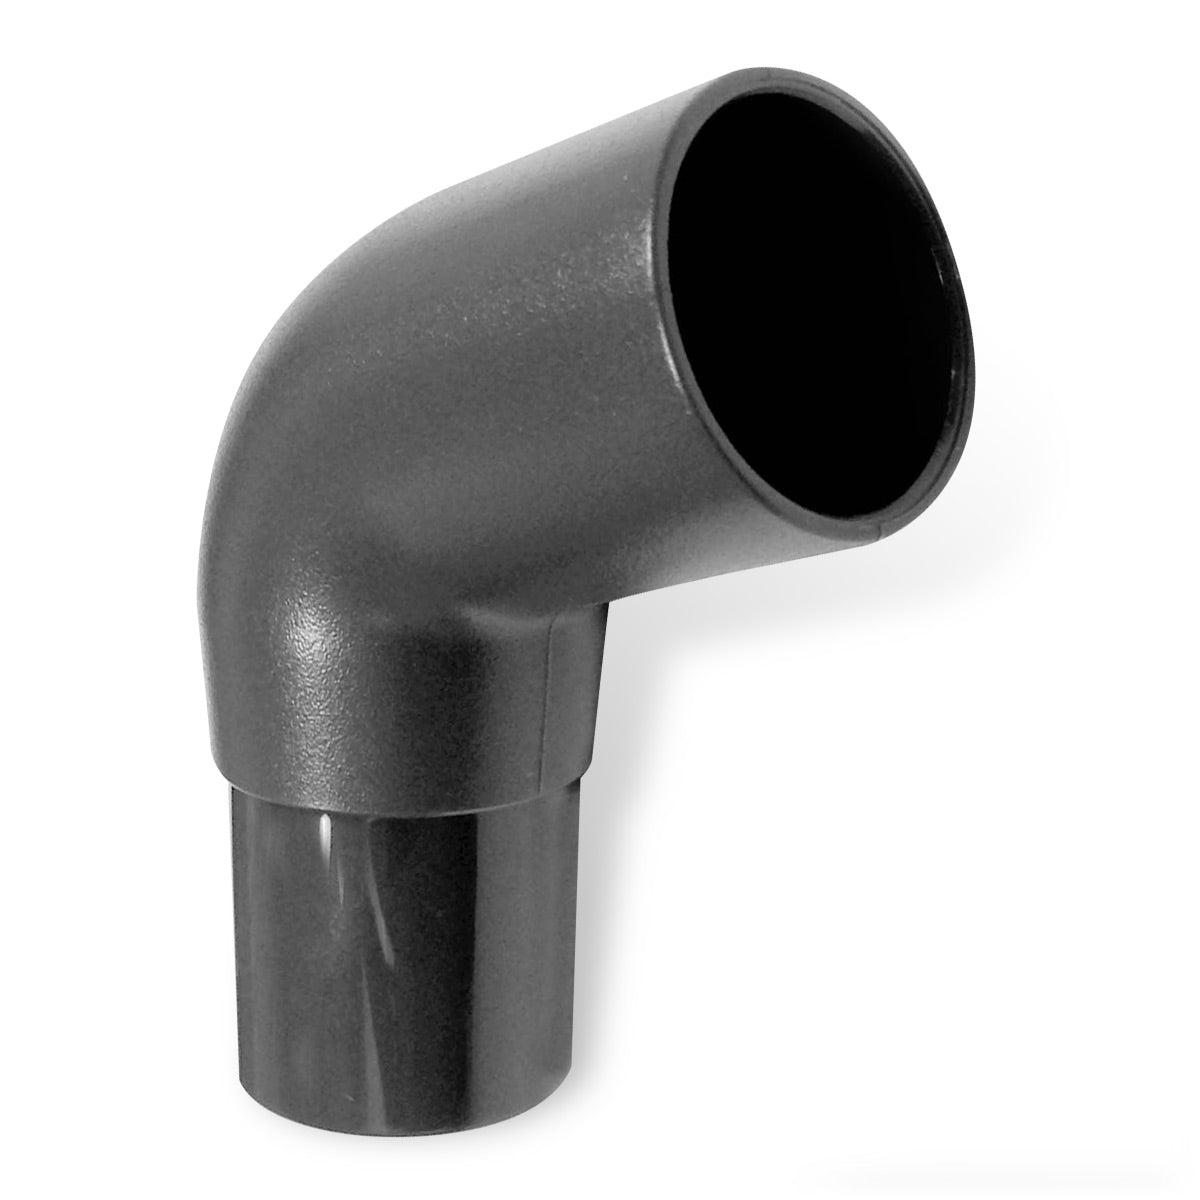 Gray Tubing Elbow Connector for CPAP/BiPAP Machines